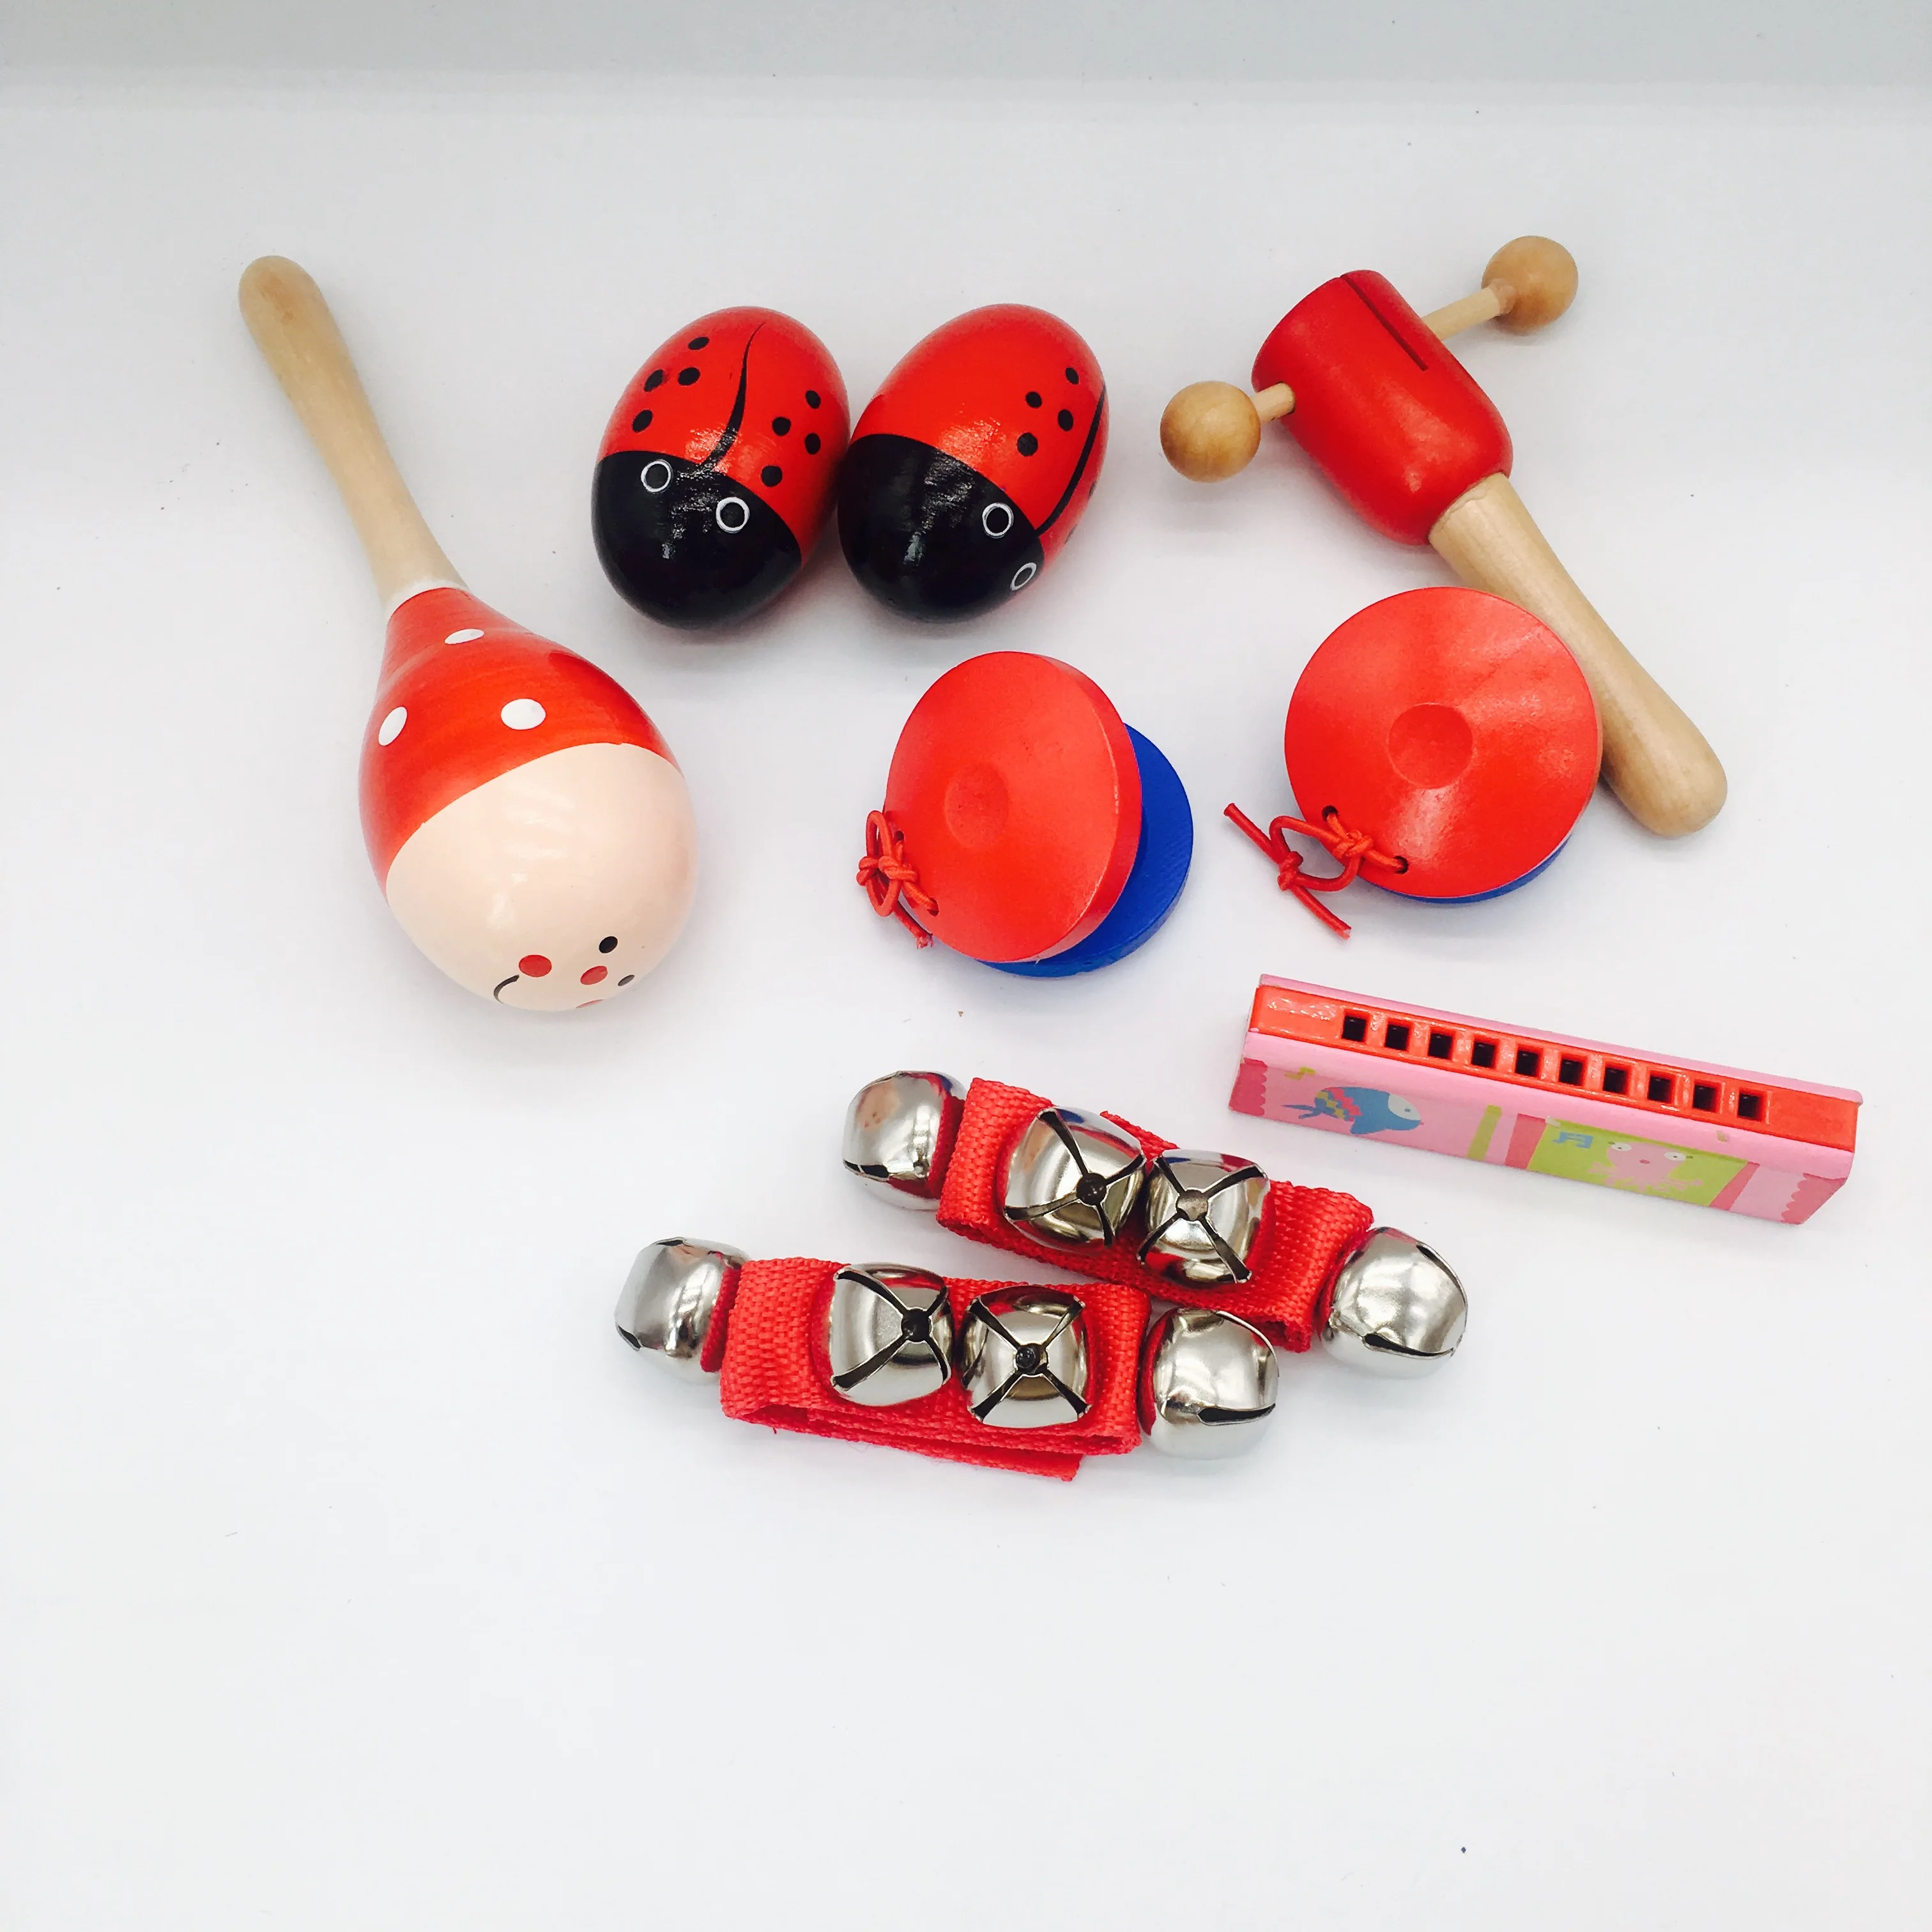 Egg Shakers Wooden Percussion Musical Maracas Child Kids Toys-6pcs 